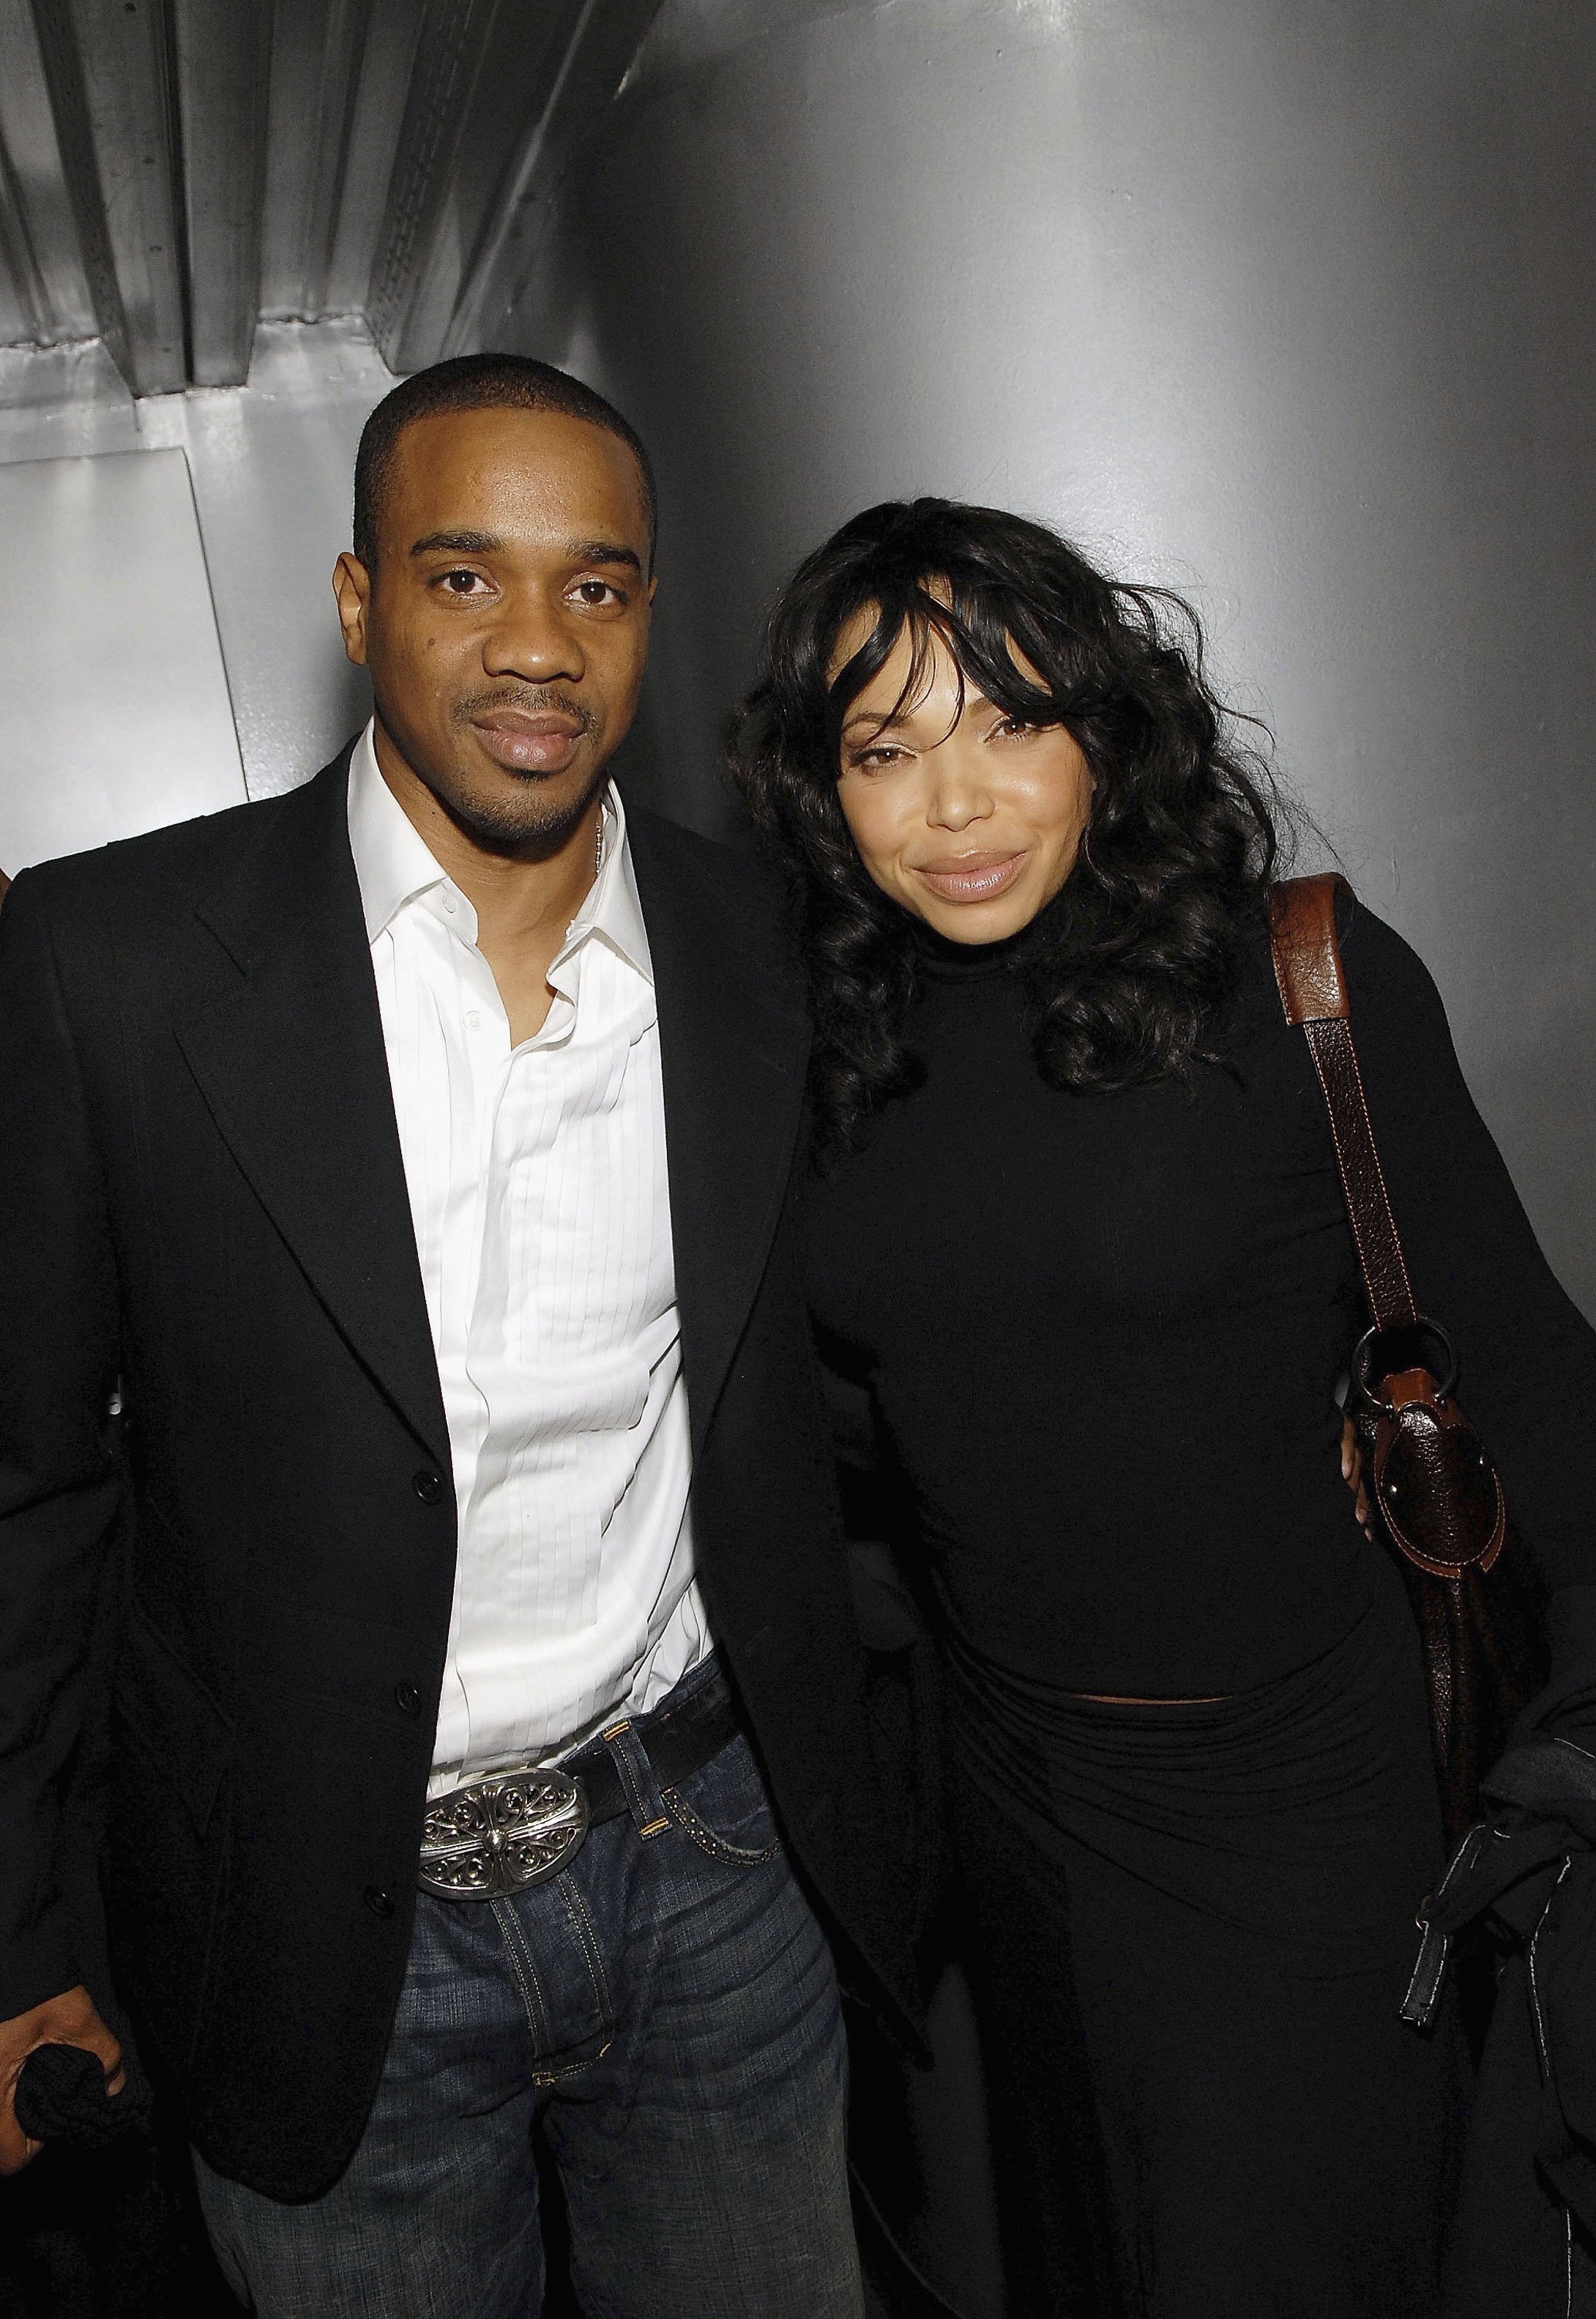 Duane Martin and Tisha Campbell Martin at the screening of "ATL" on March 27, 2006 | Source: Getty Images